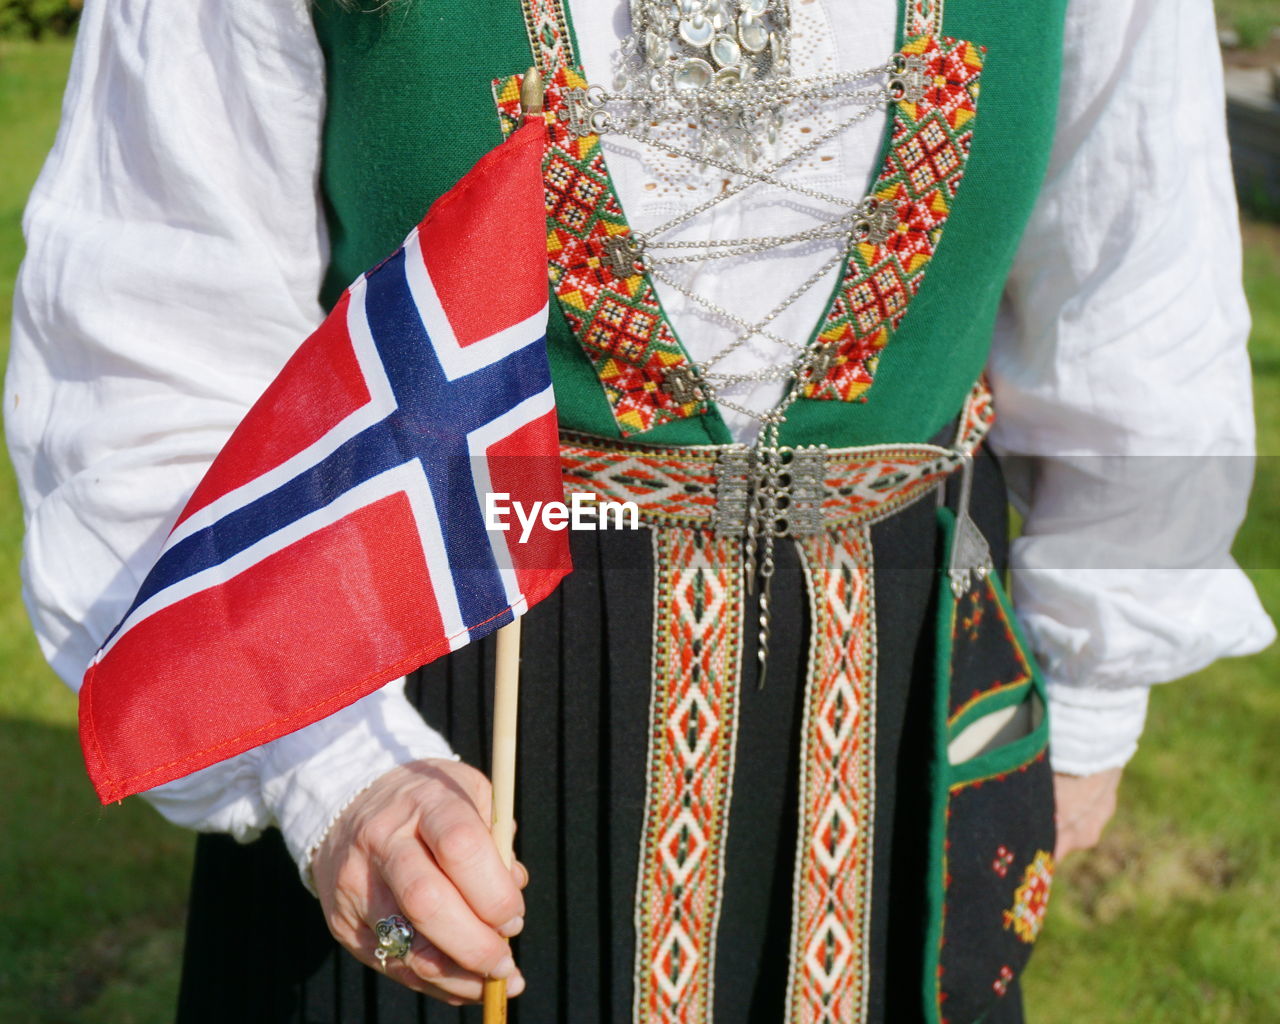 Midsection of woman wearing traditional clothing while holding norwegian flag